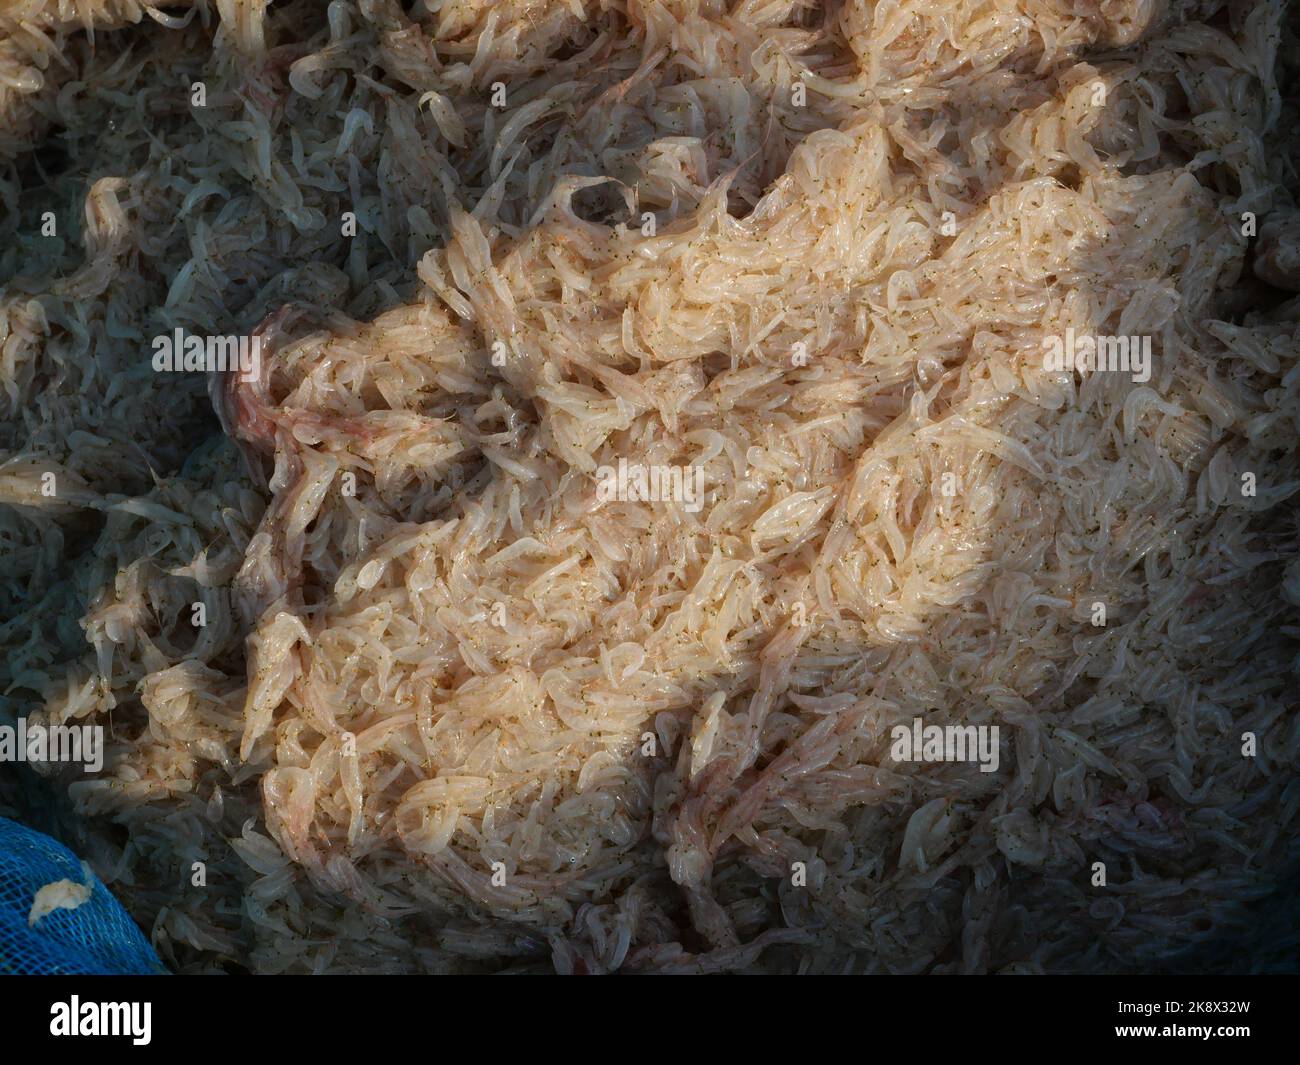 Group of fresh Krill or Opossum shrimp, Plankton that fishermen trap for cooking Stock Photo